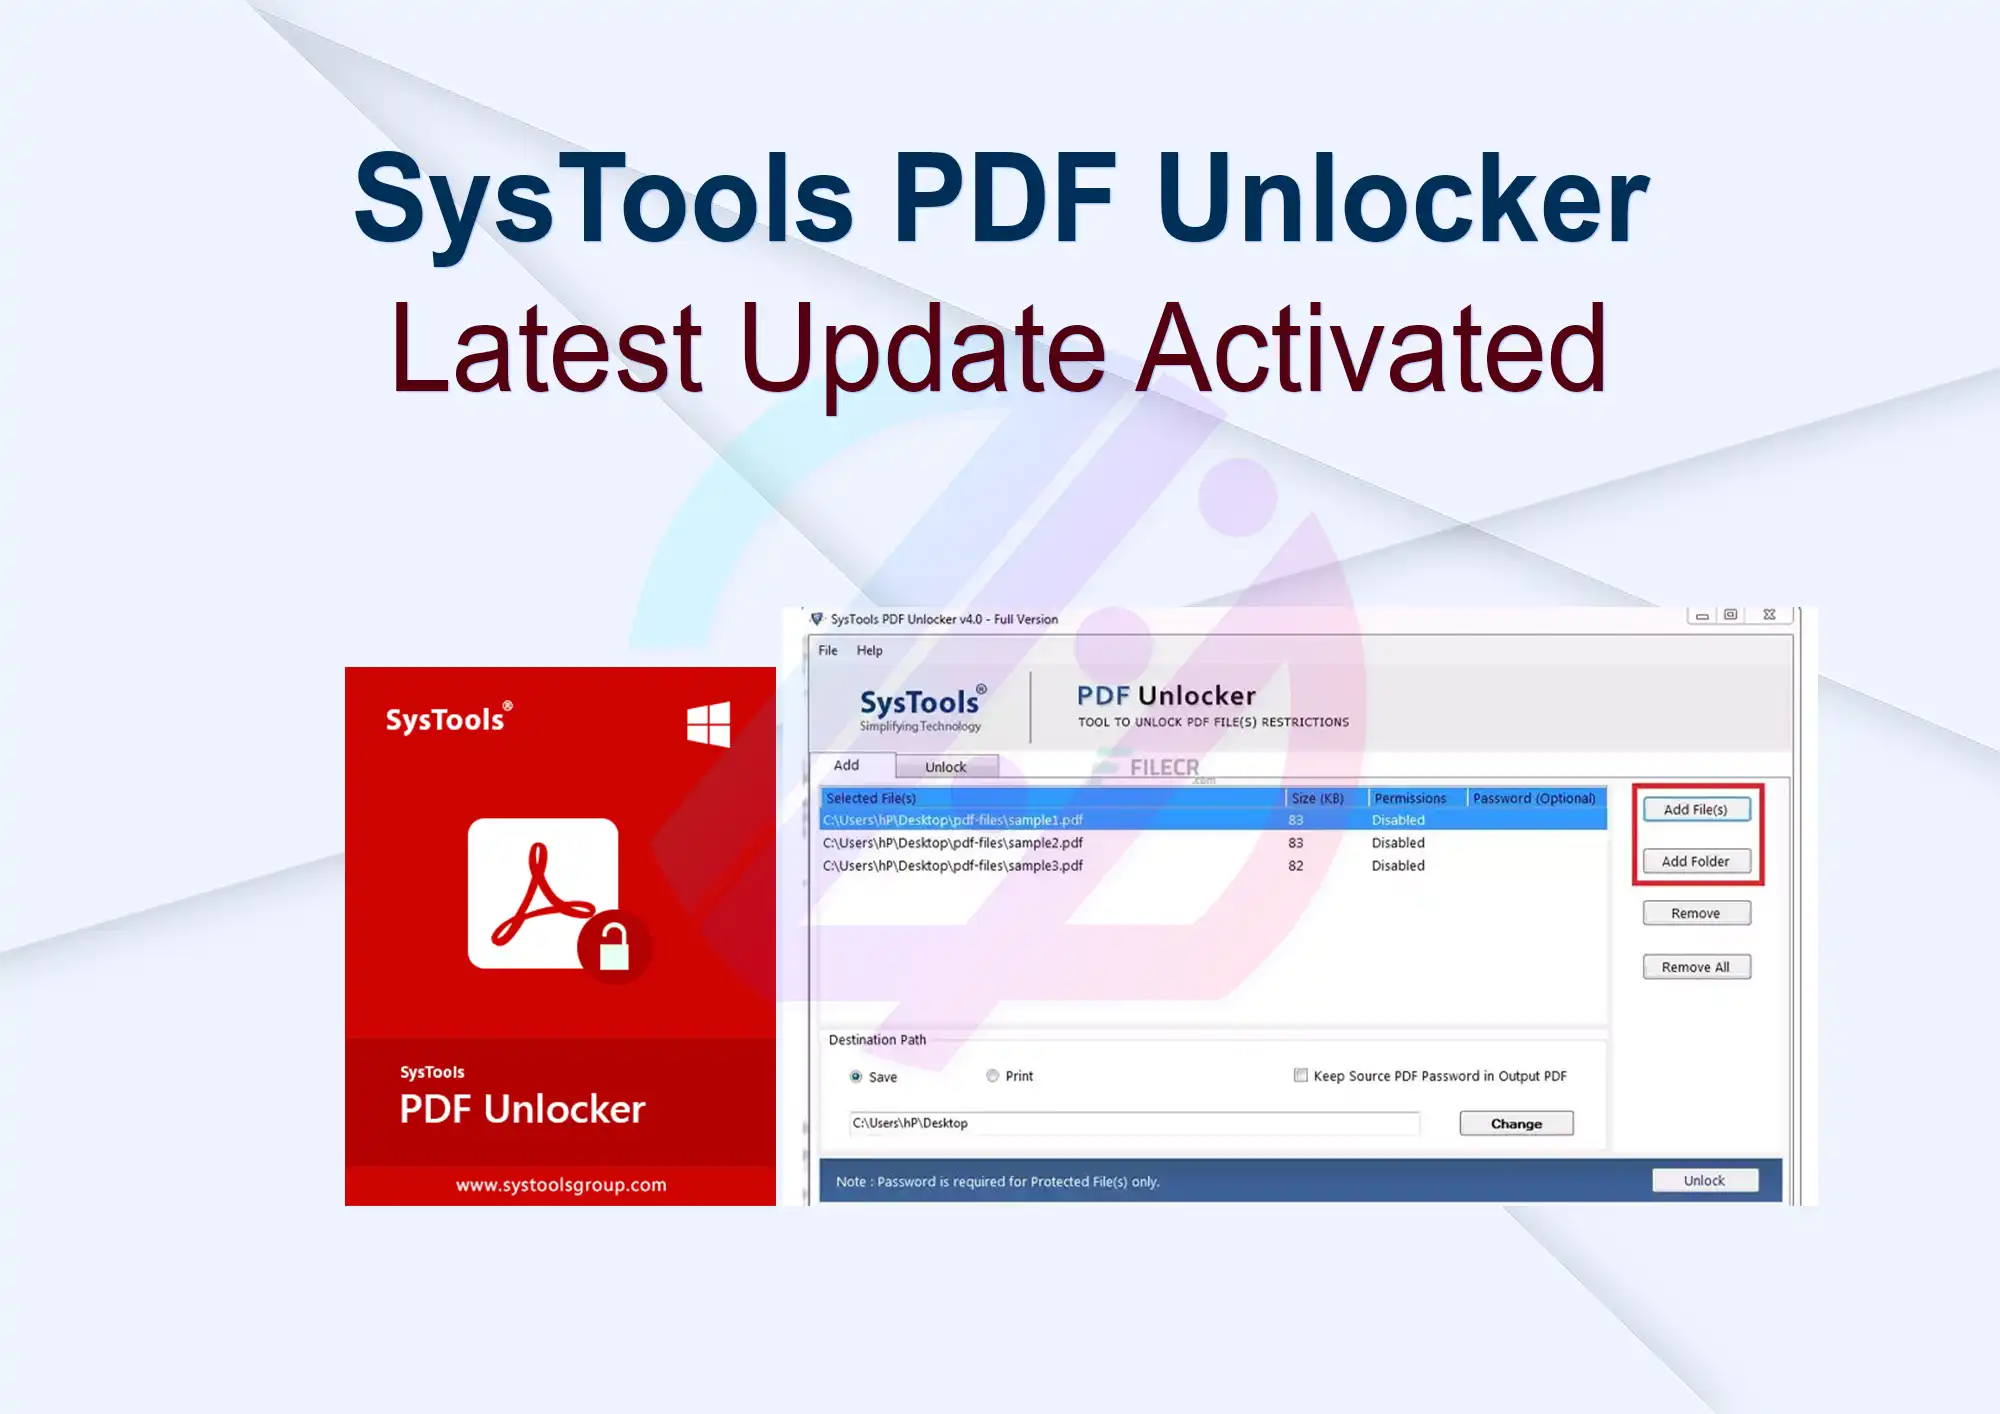 SysTools PDF Unlocker Latest Update Activated